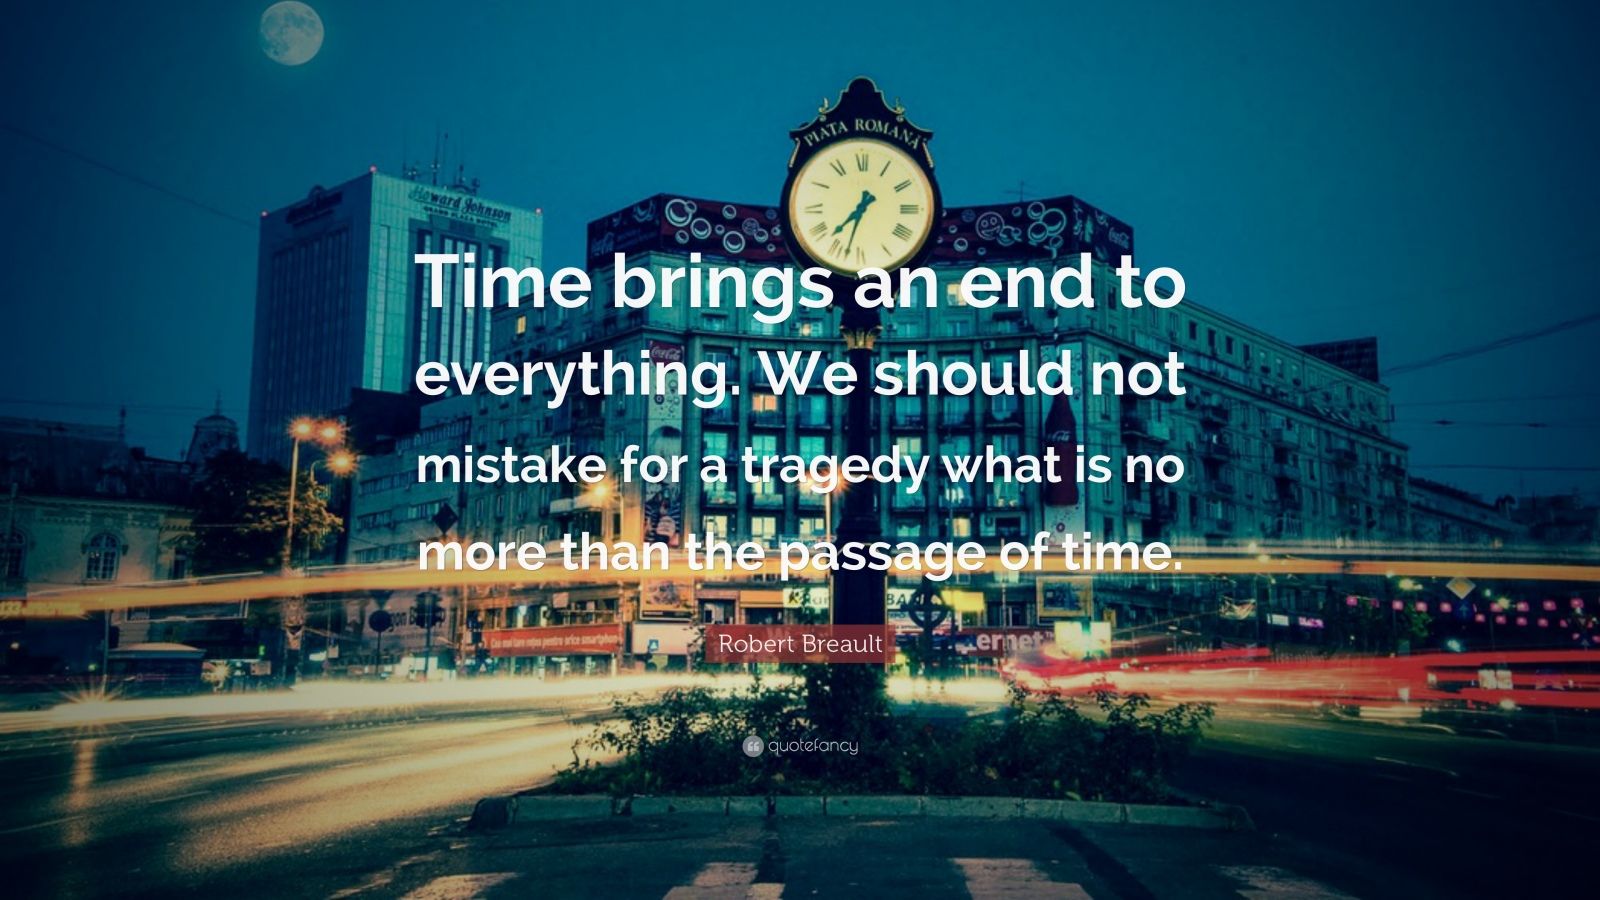 Mistake Quotes (40 wallpapers) - Quotefancy